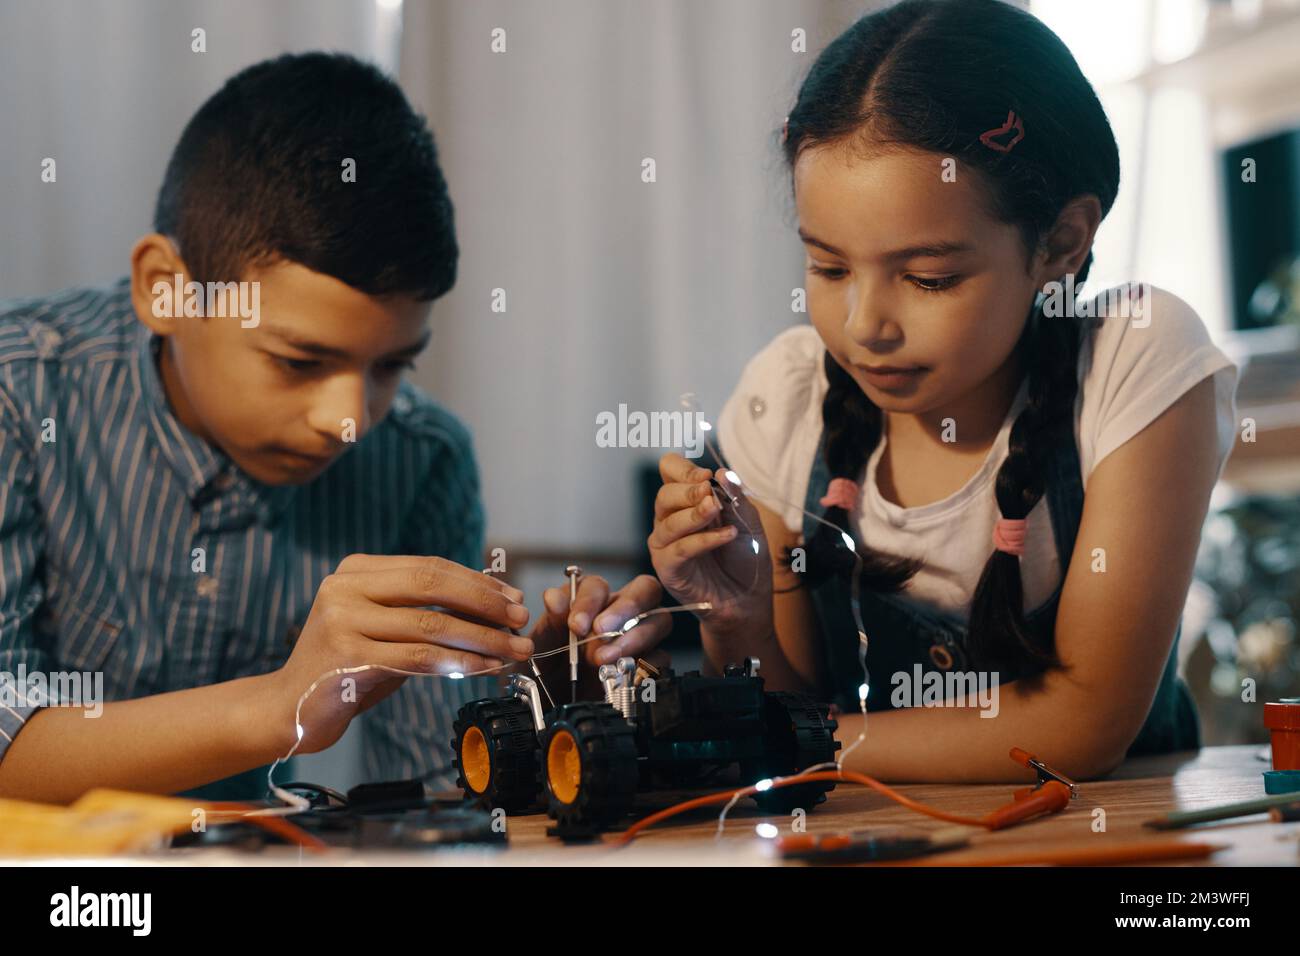 Their technical skills are already at a high level. two adorable young siblings building a robotic toy car together at home. Stock Photo